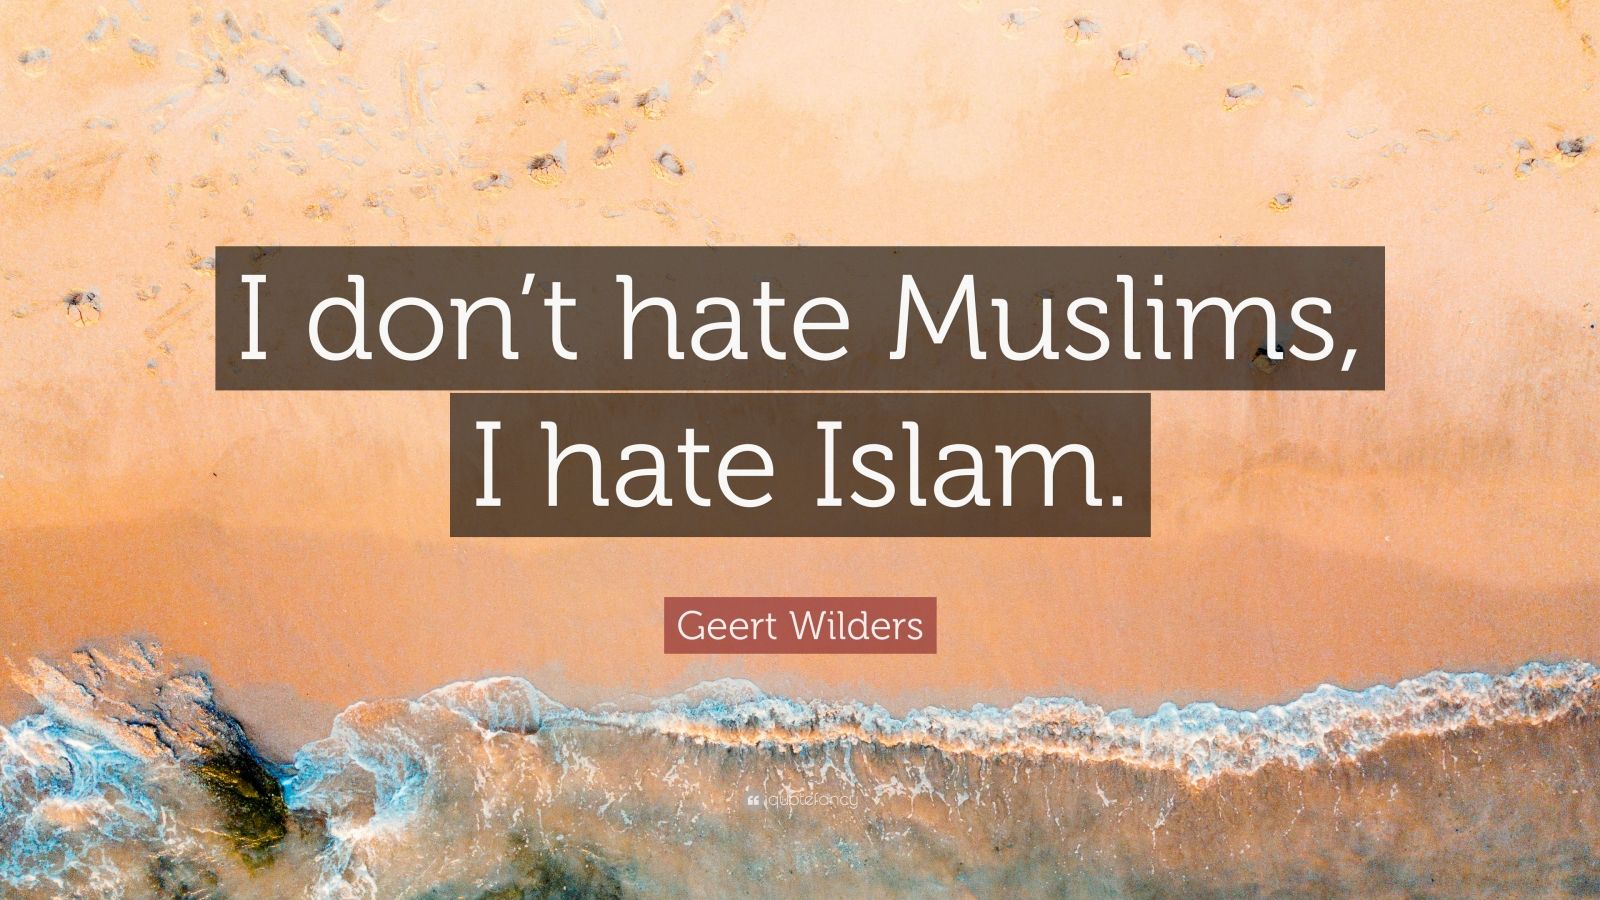 Geert Wilders Quote: “I don’t hate Muslims, I hate Islam.” (12